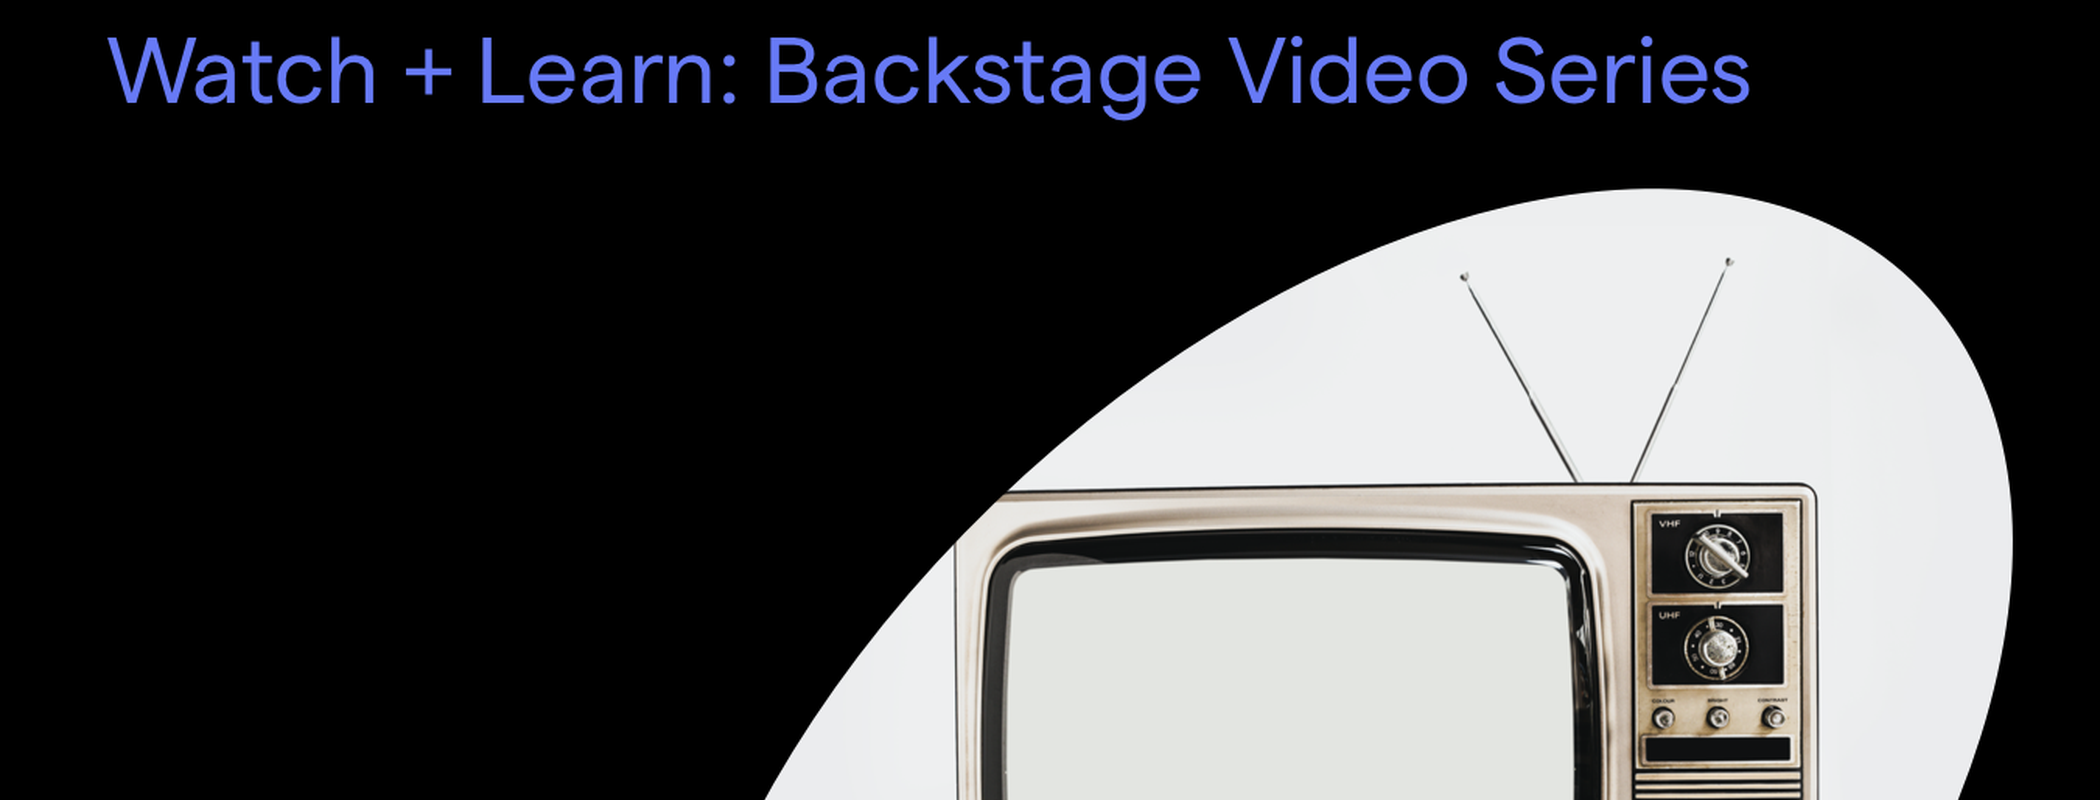 Keep Learning Year-Round With Backstages Digital Seminars + Interviews pic